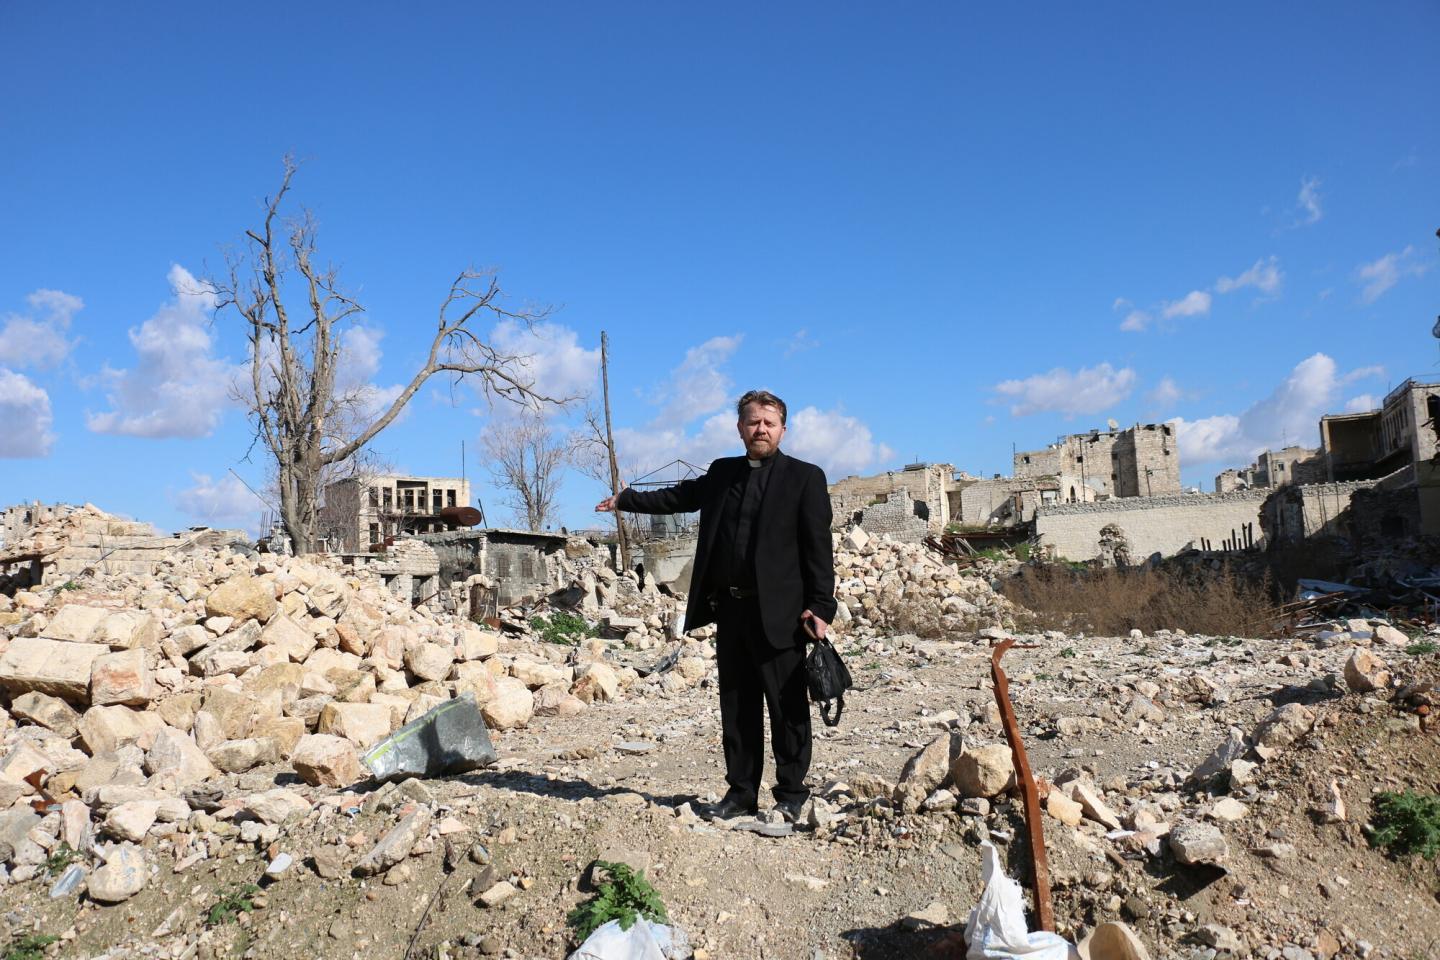 A Reverend in a clerical collar stands on a pile of rubble in Syria